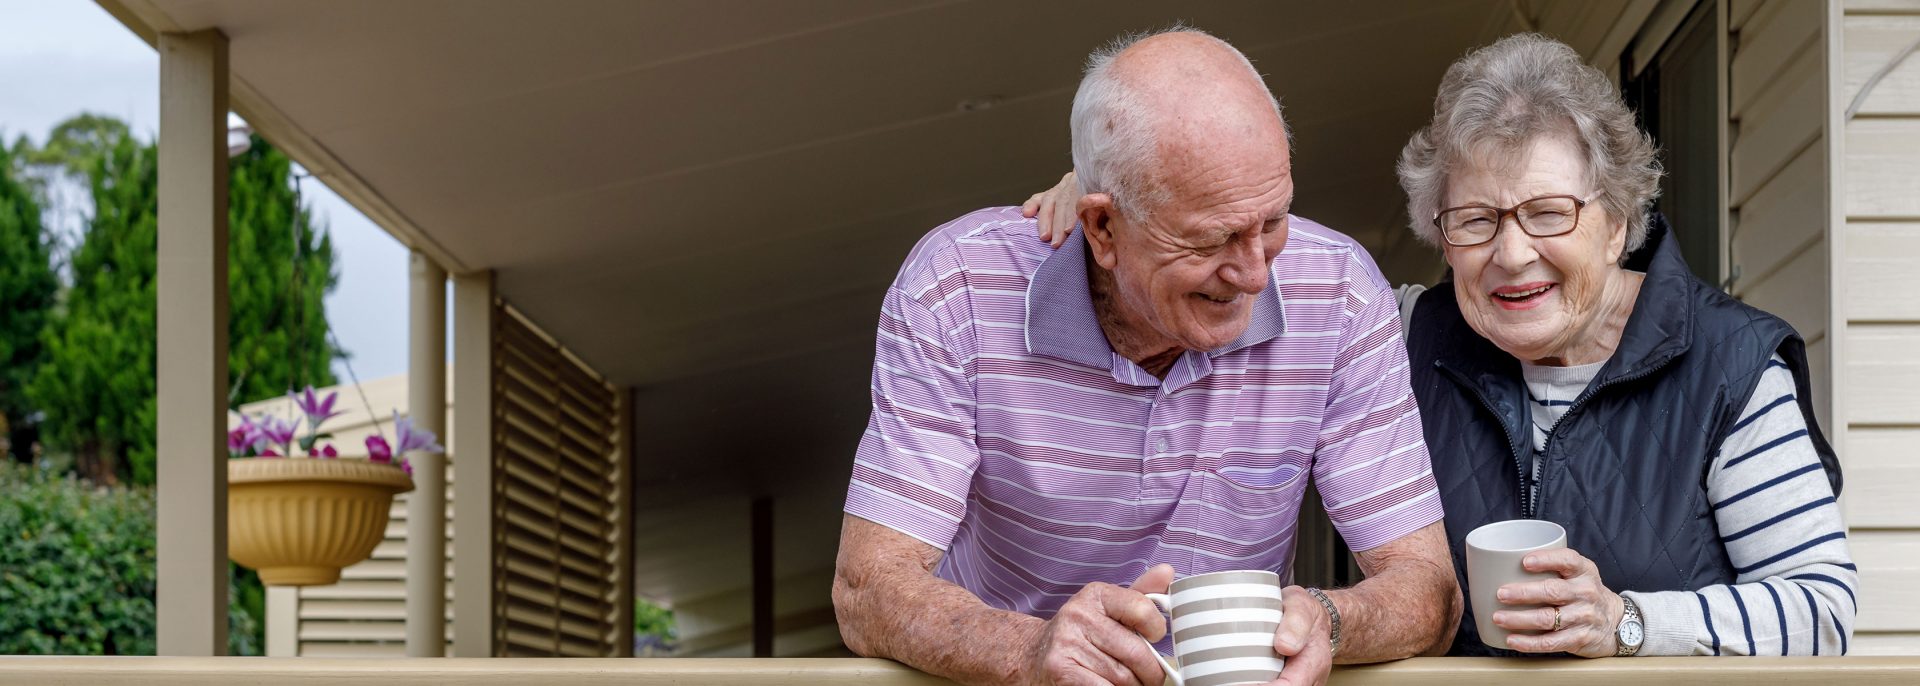 Aged care couple sipping coffee on patio